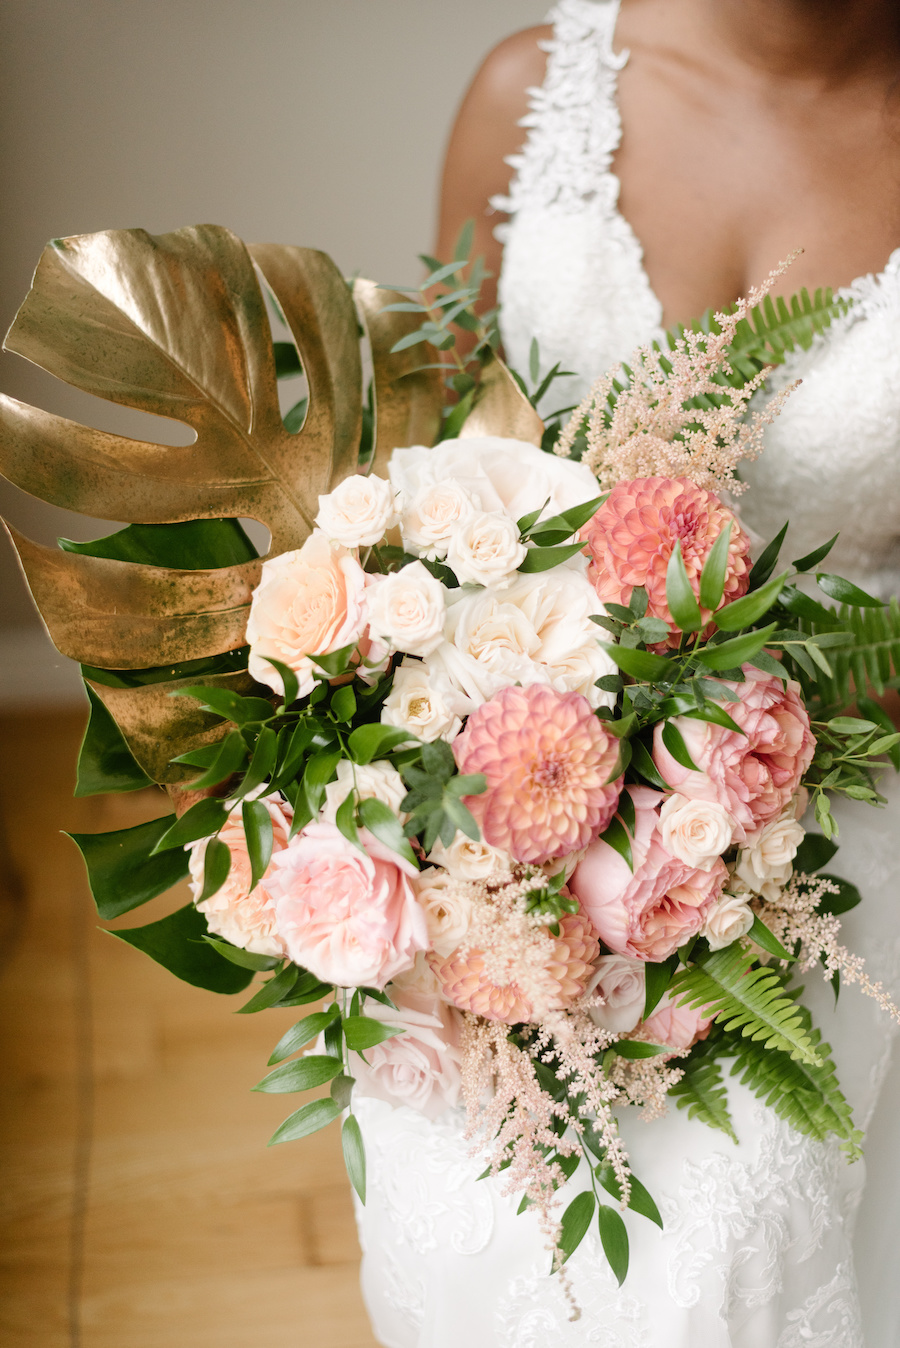 Photo of a bride holding a summer bouquet of tropical flowers, ferns and monstera leaves